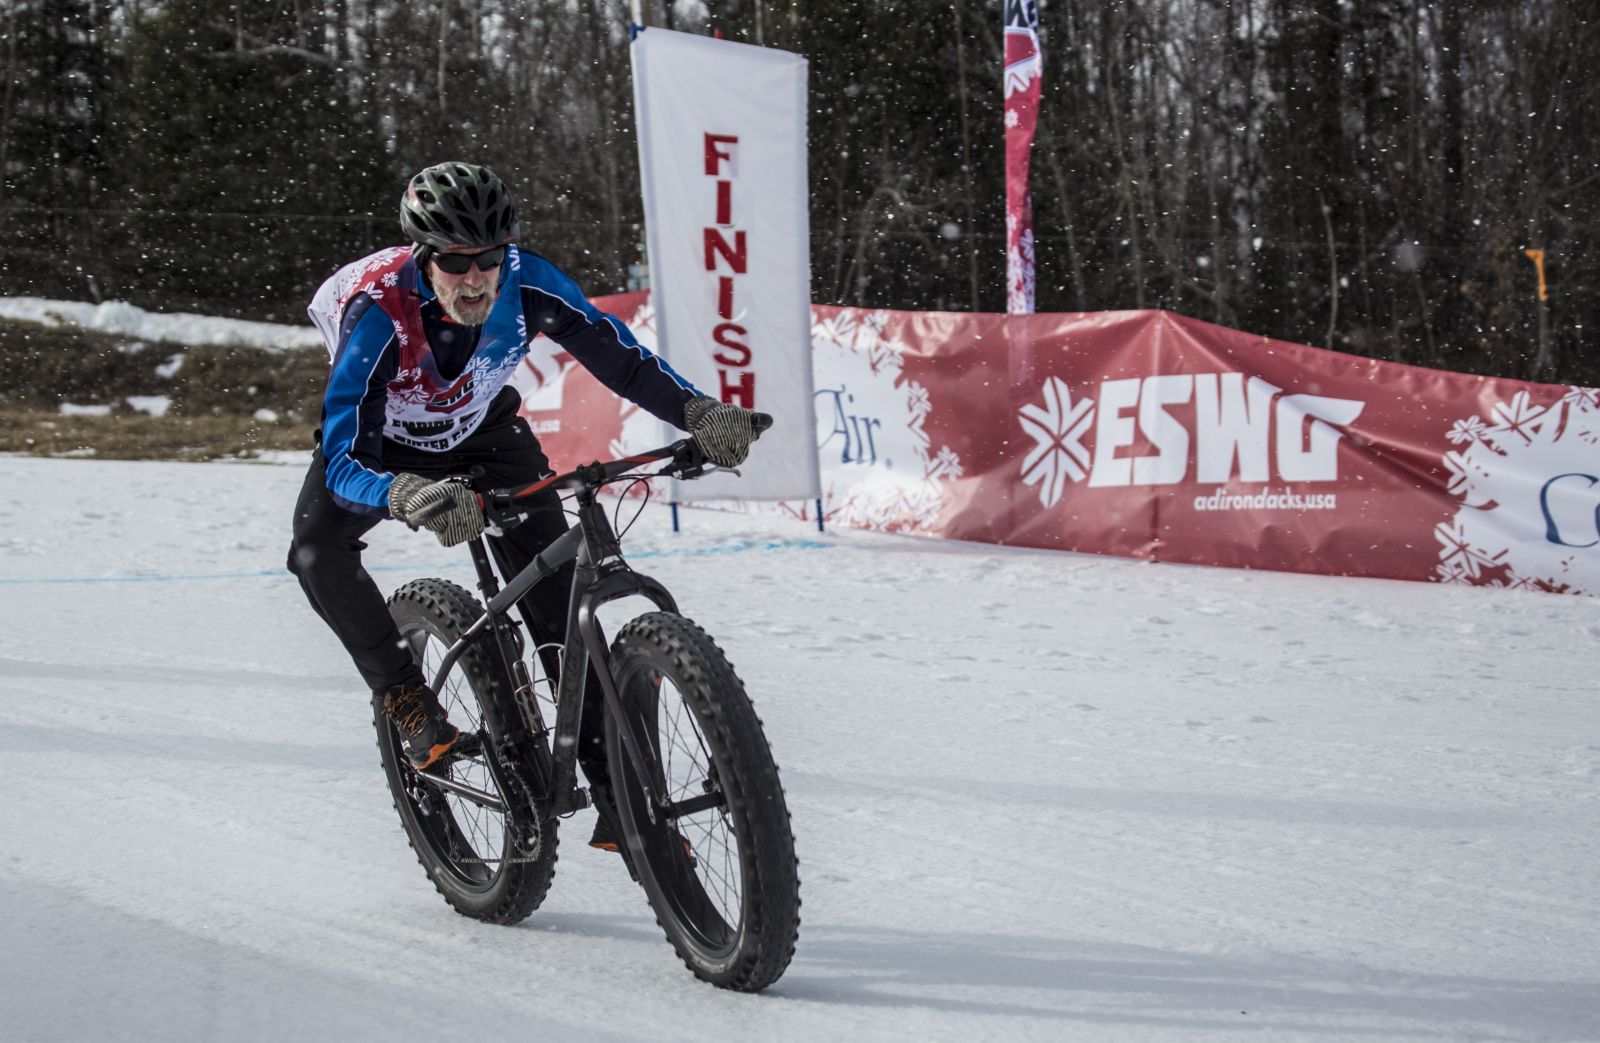 My father is competing in the fat tire bike race at the 2016 Empire State Winter Games. I can't wait to try out fat tire biking. I think I can keep up!